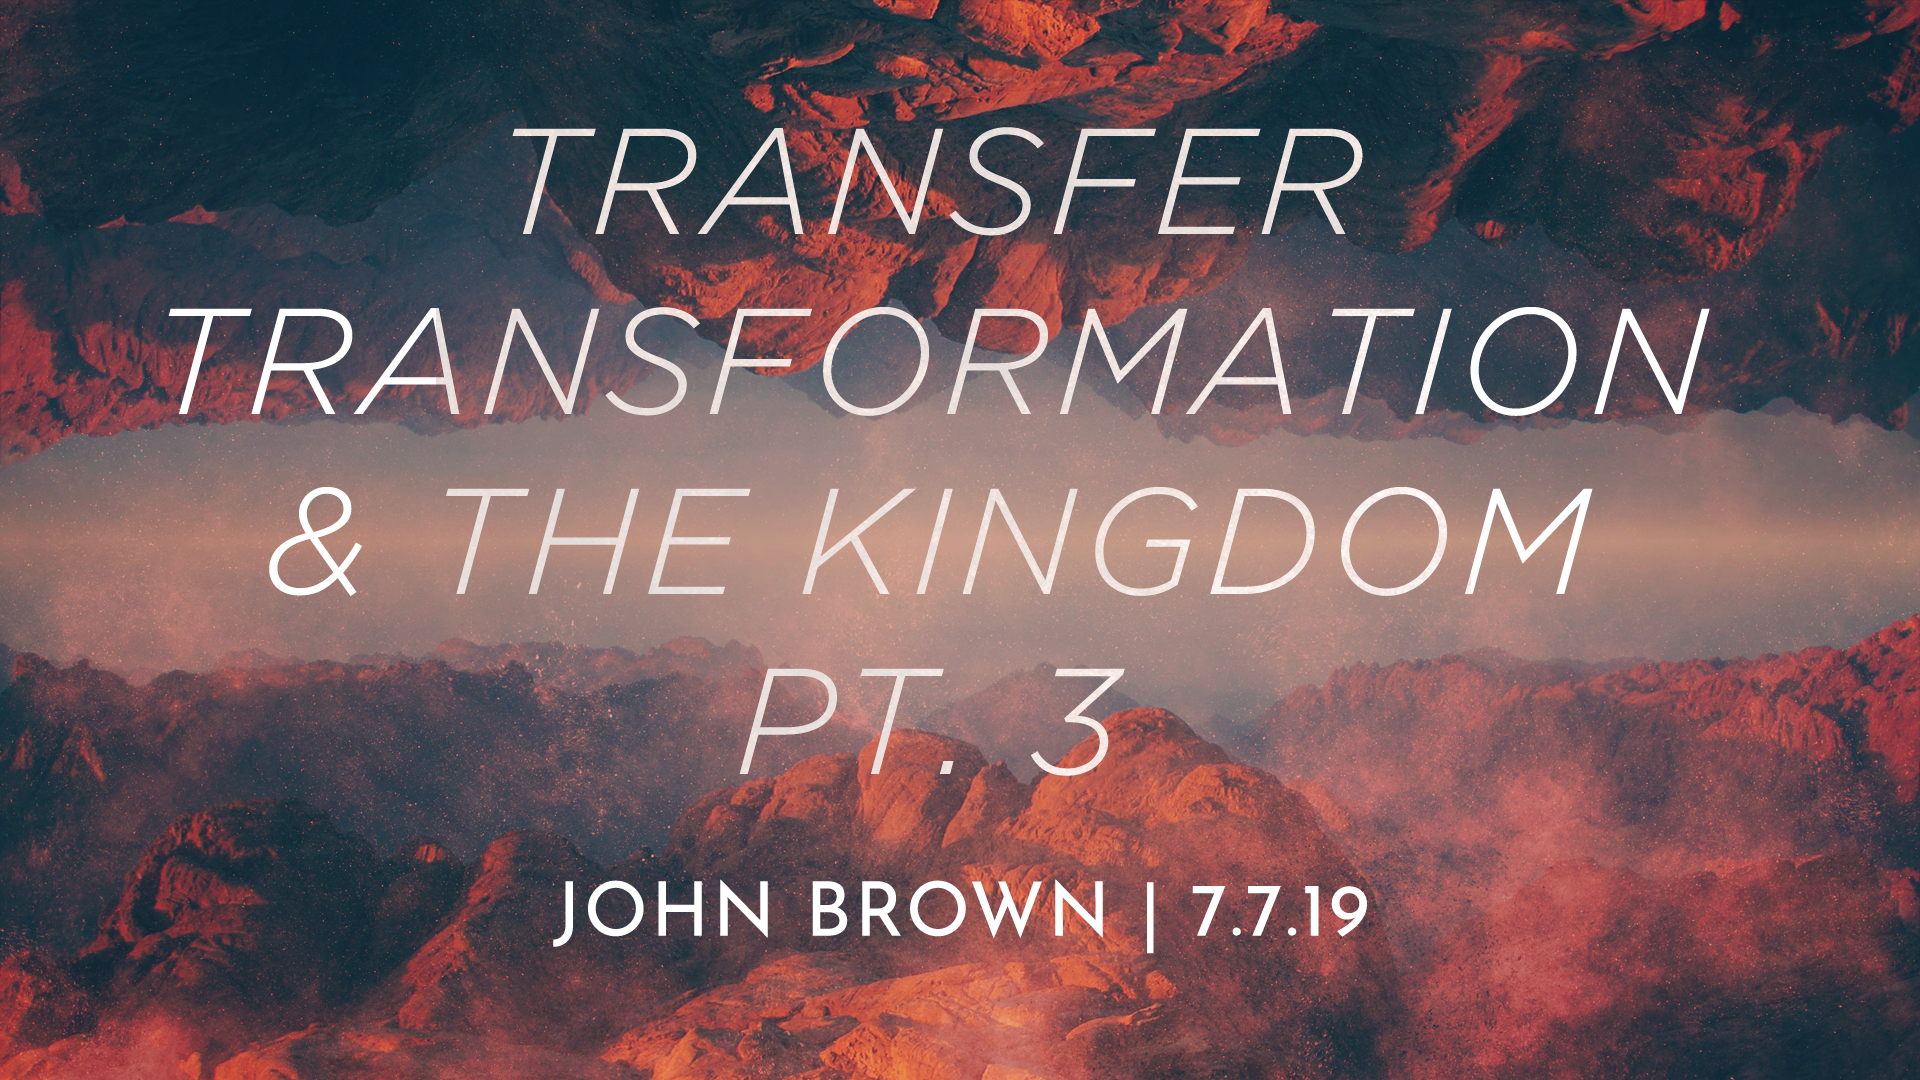 Transfer, Transformation And The Kingdom, Part 3